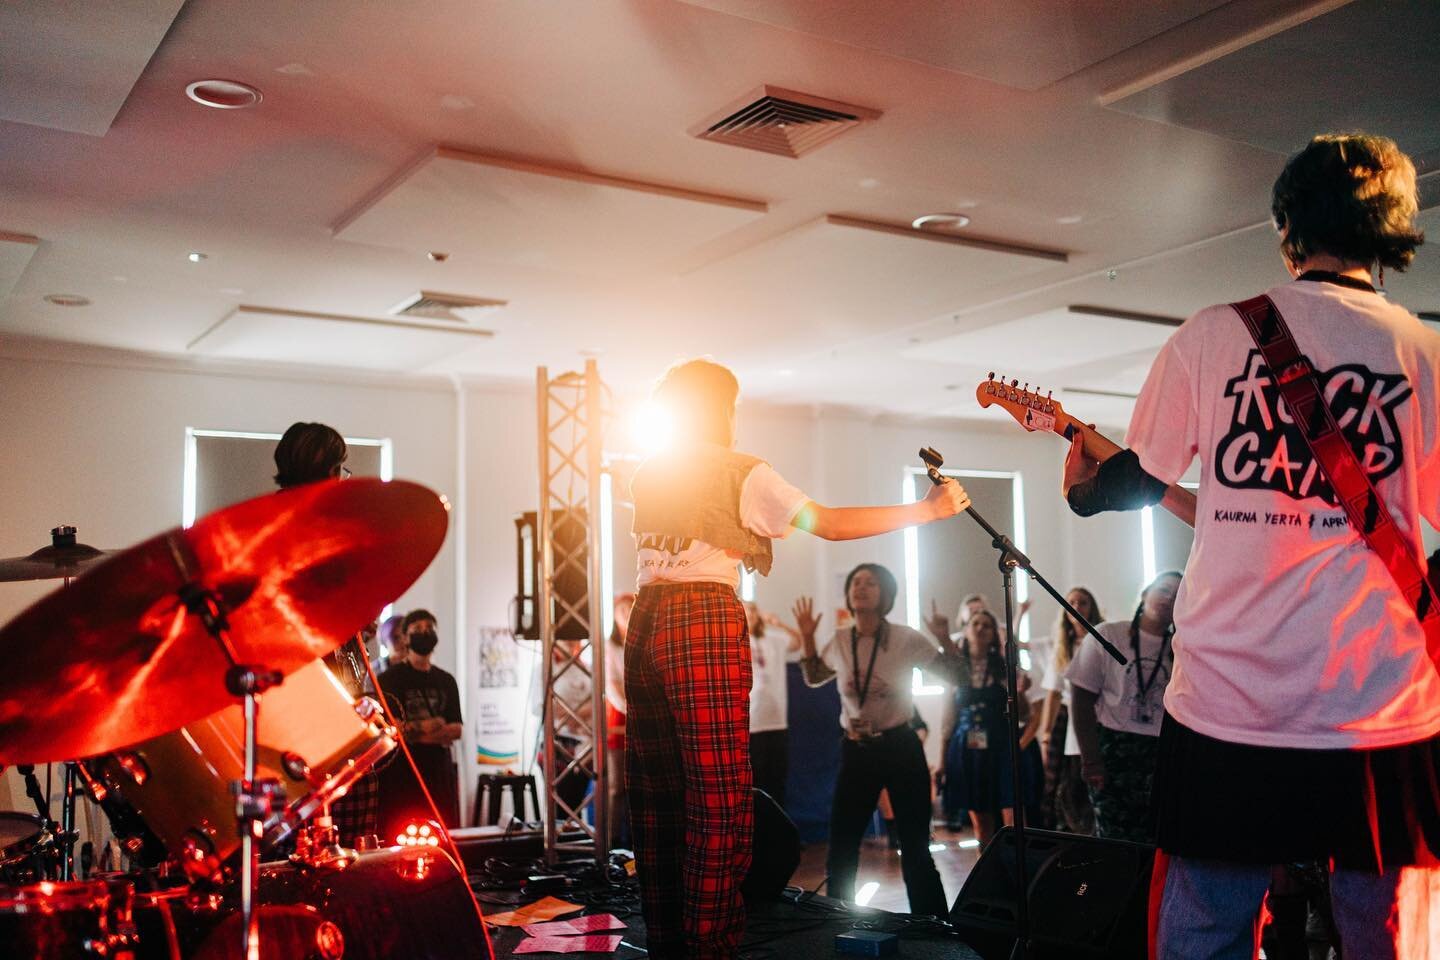 Today is the day! After a massive week at Rock Camp, Adelaide&rsquo;s newest rockstars are ready to perform! 🤘✨ Join us at the showcase today at @unibar_adl 1-3pm, tickets still available in bio or on the door!

📸 @mariahanzil